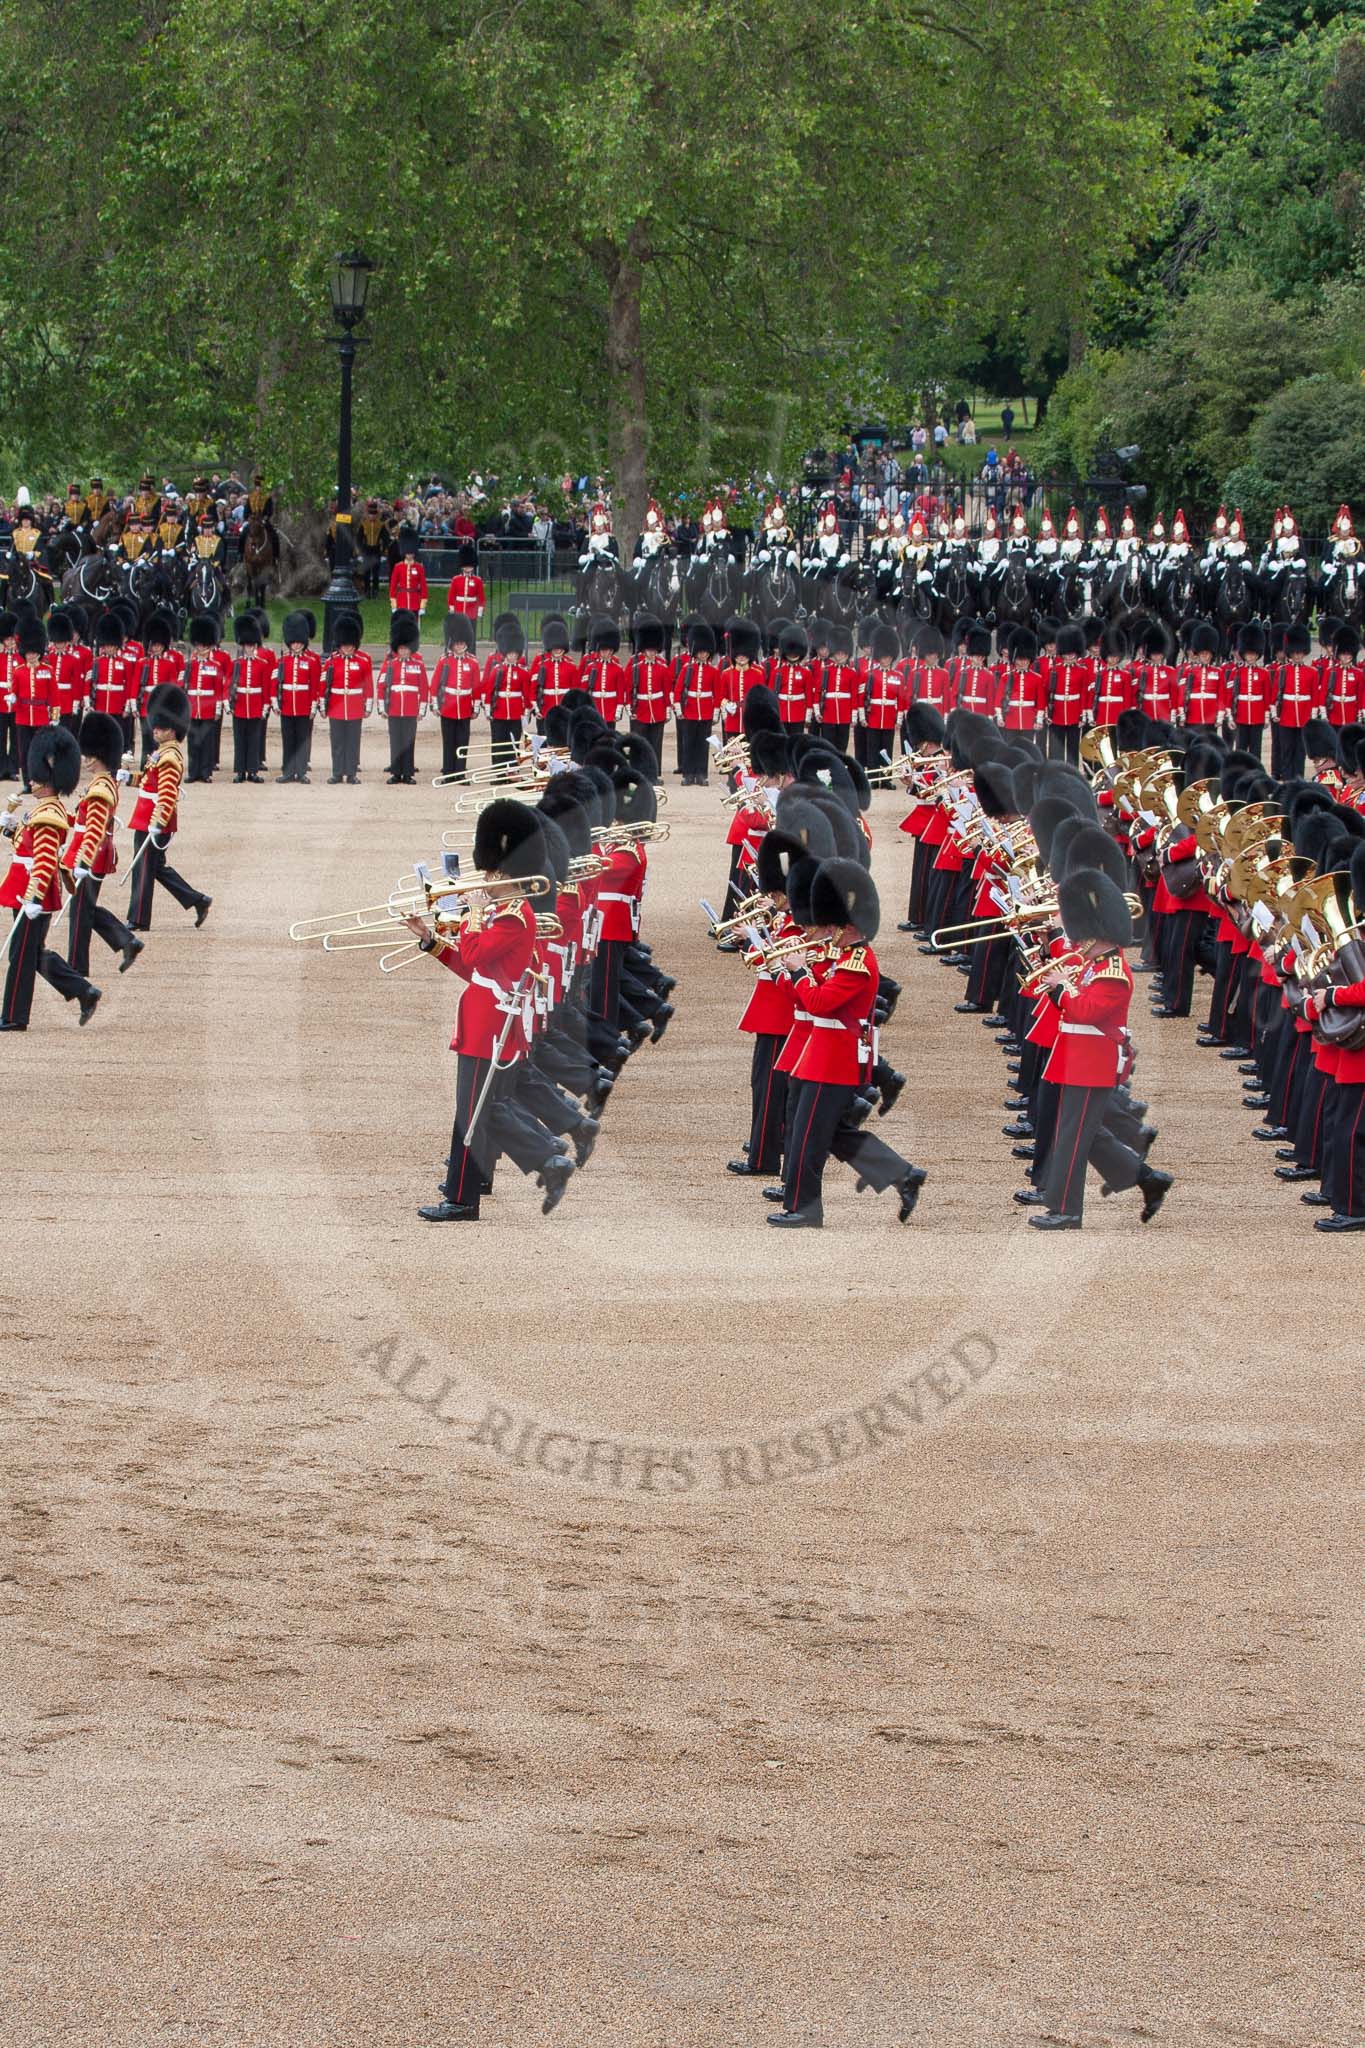 The Colonel's Review 2012: The Massed Bands Troop..
Horse Guards Parade, Westminster,
London SW1,

United Kingdom,
on 09 June 2012 at 11:10, image #232